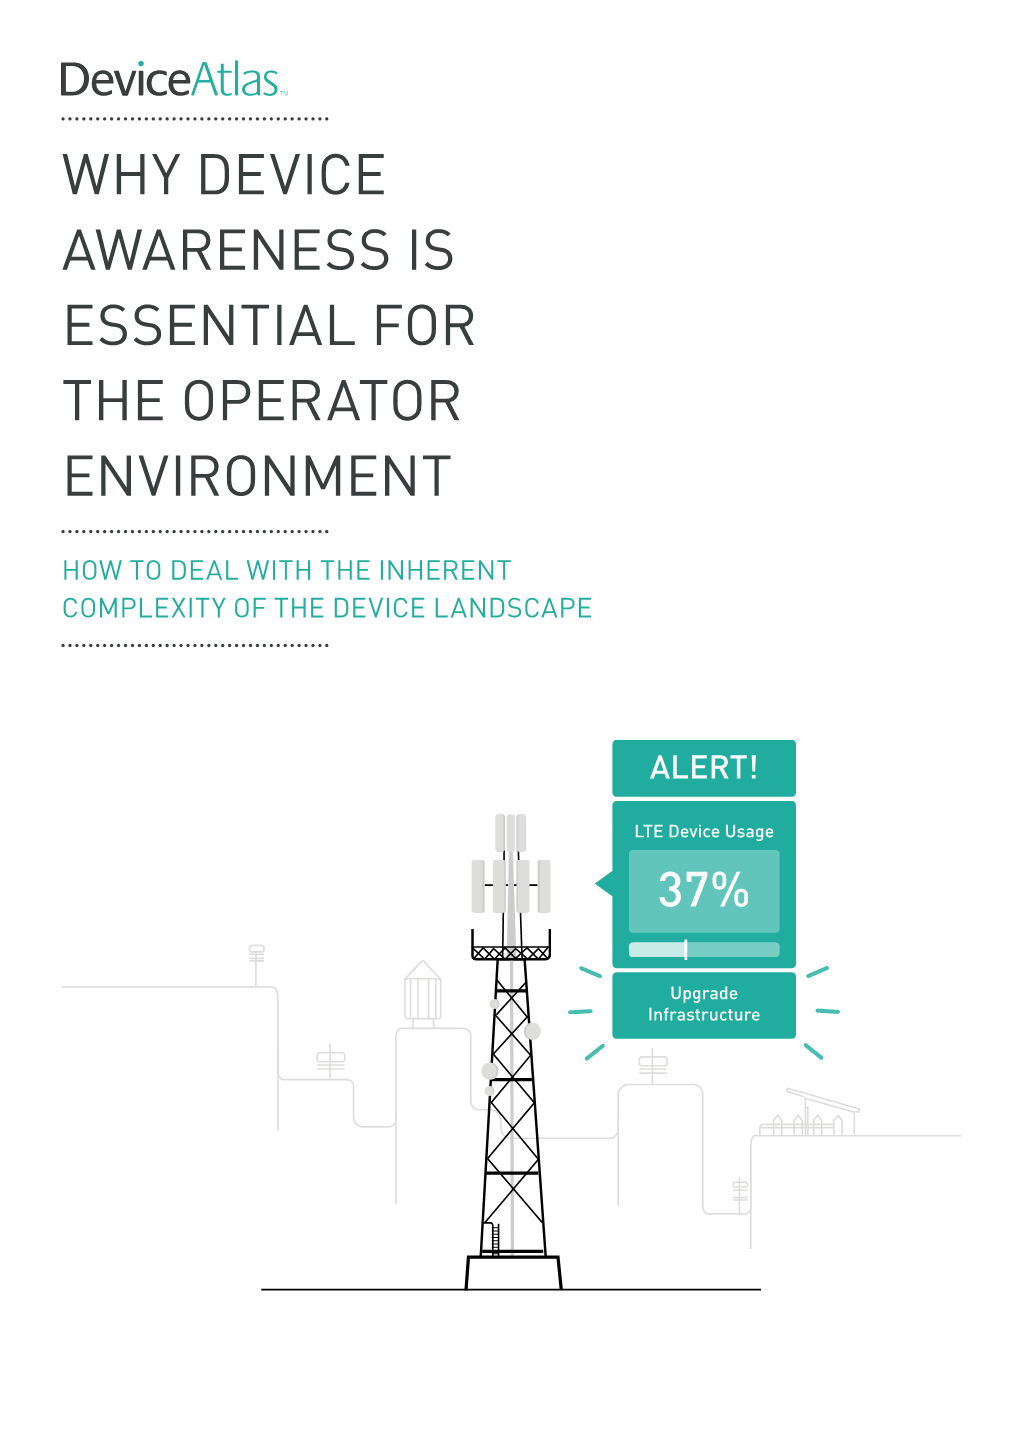 Why Device Awareness Is Essential for the Operator Environment